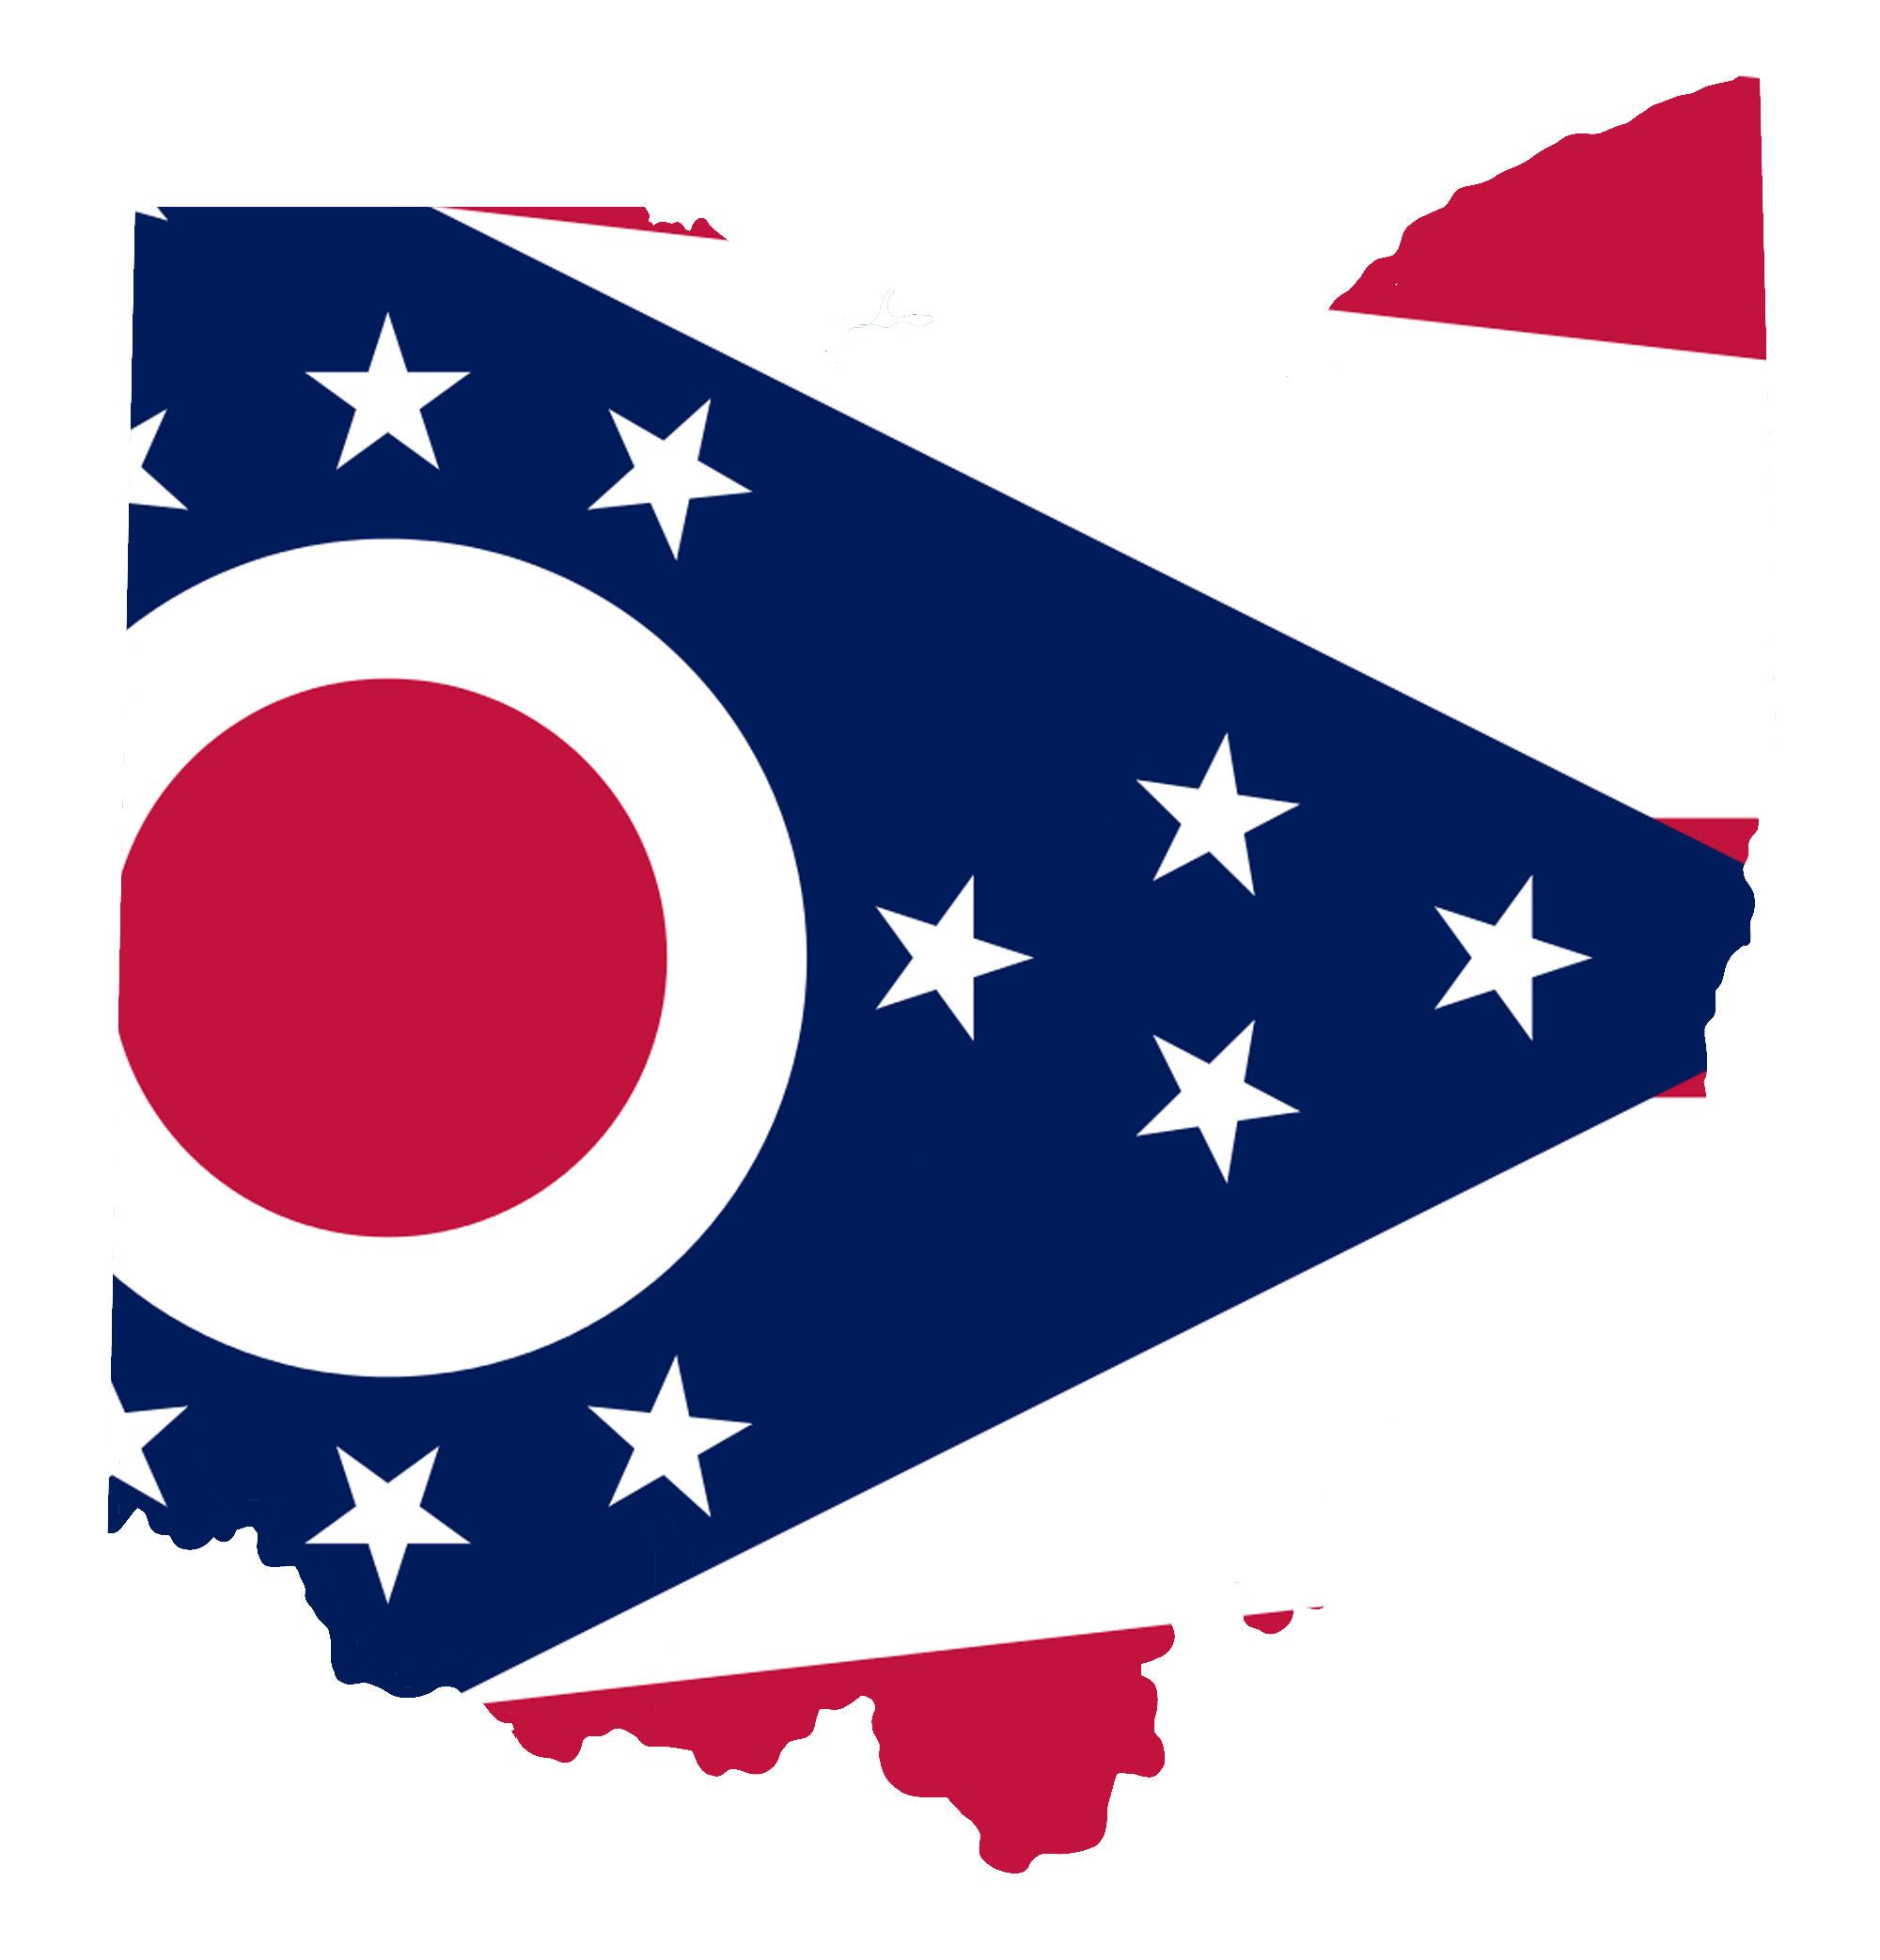 Outline of Ohio state with state flag within the outline